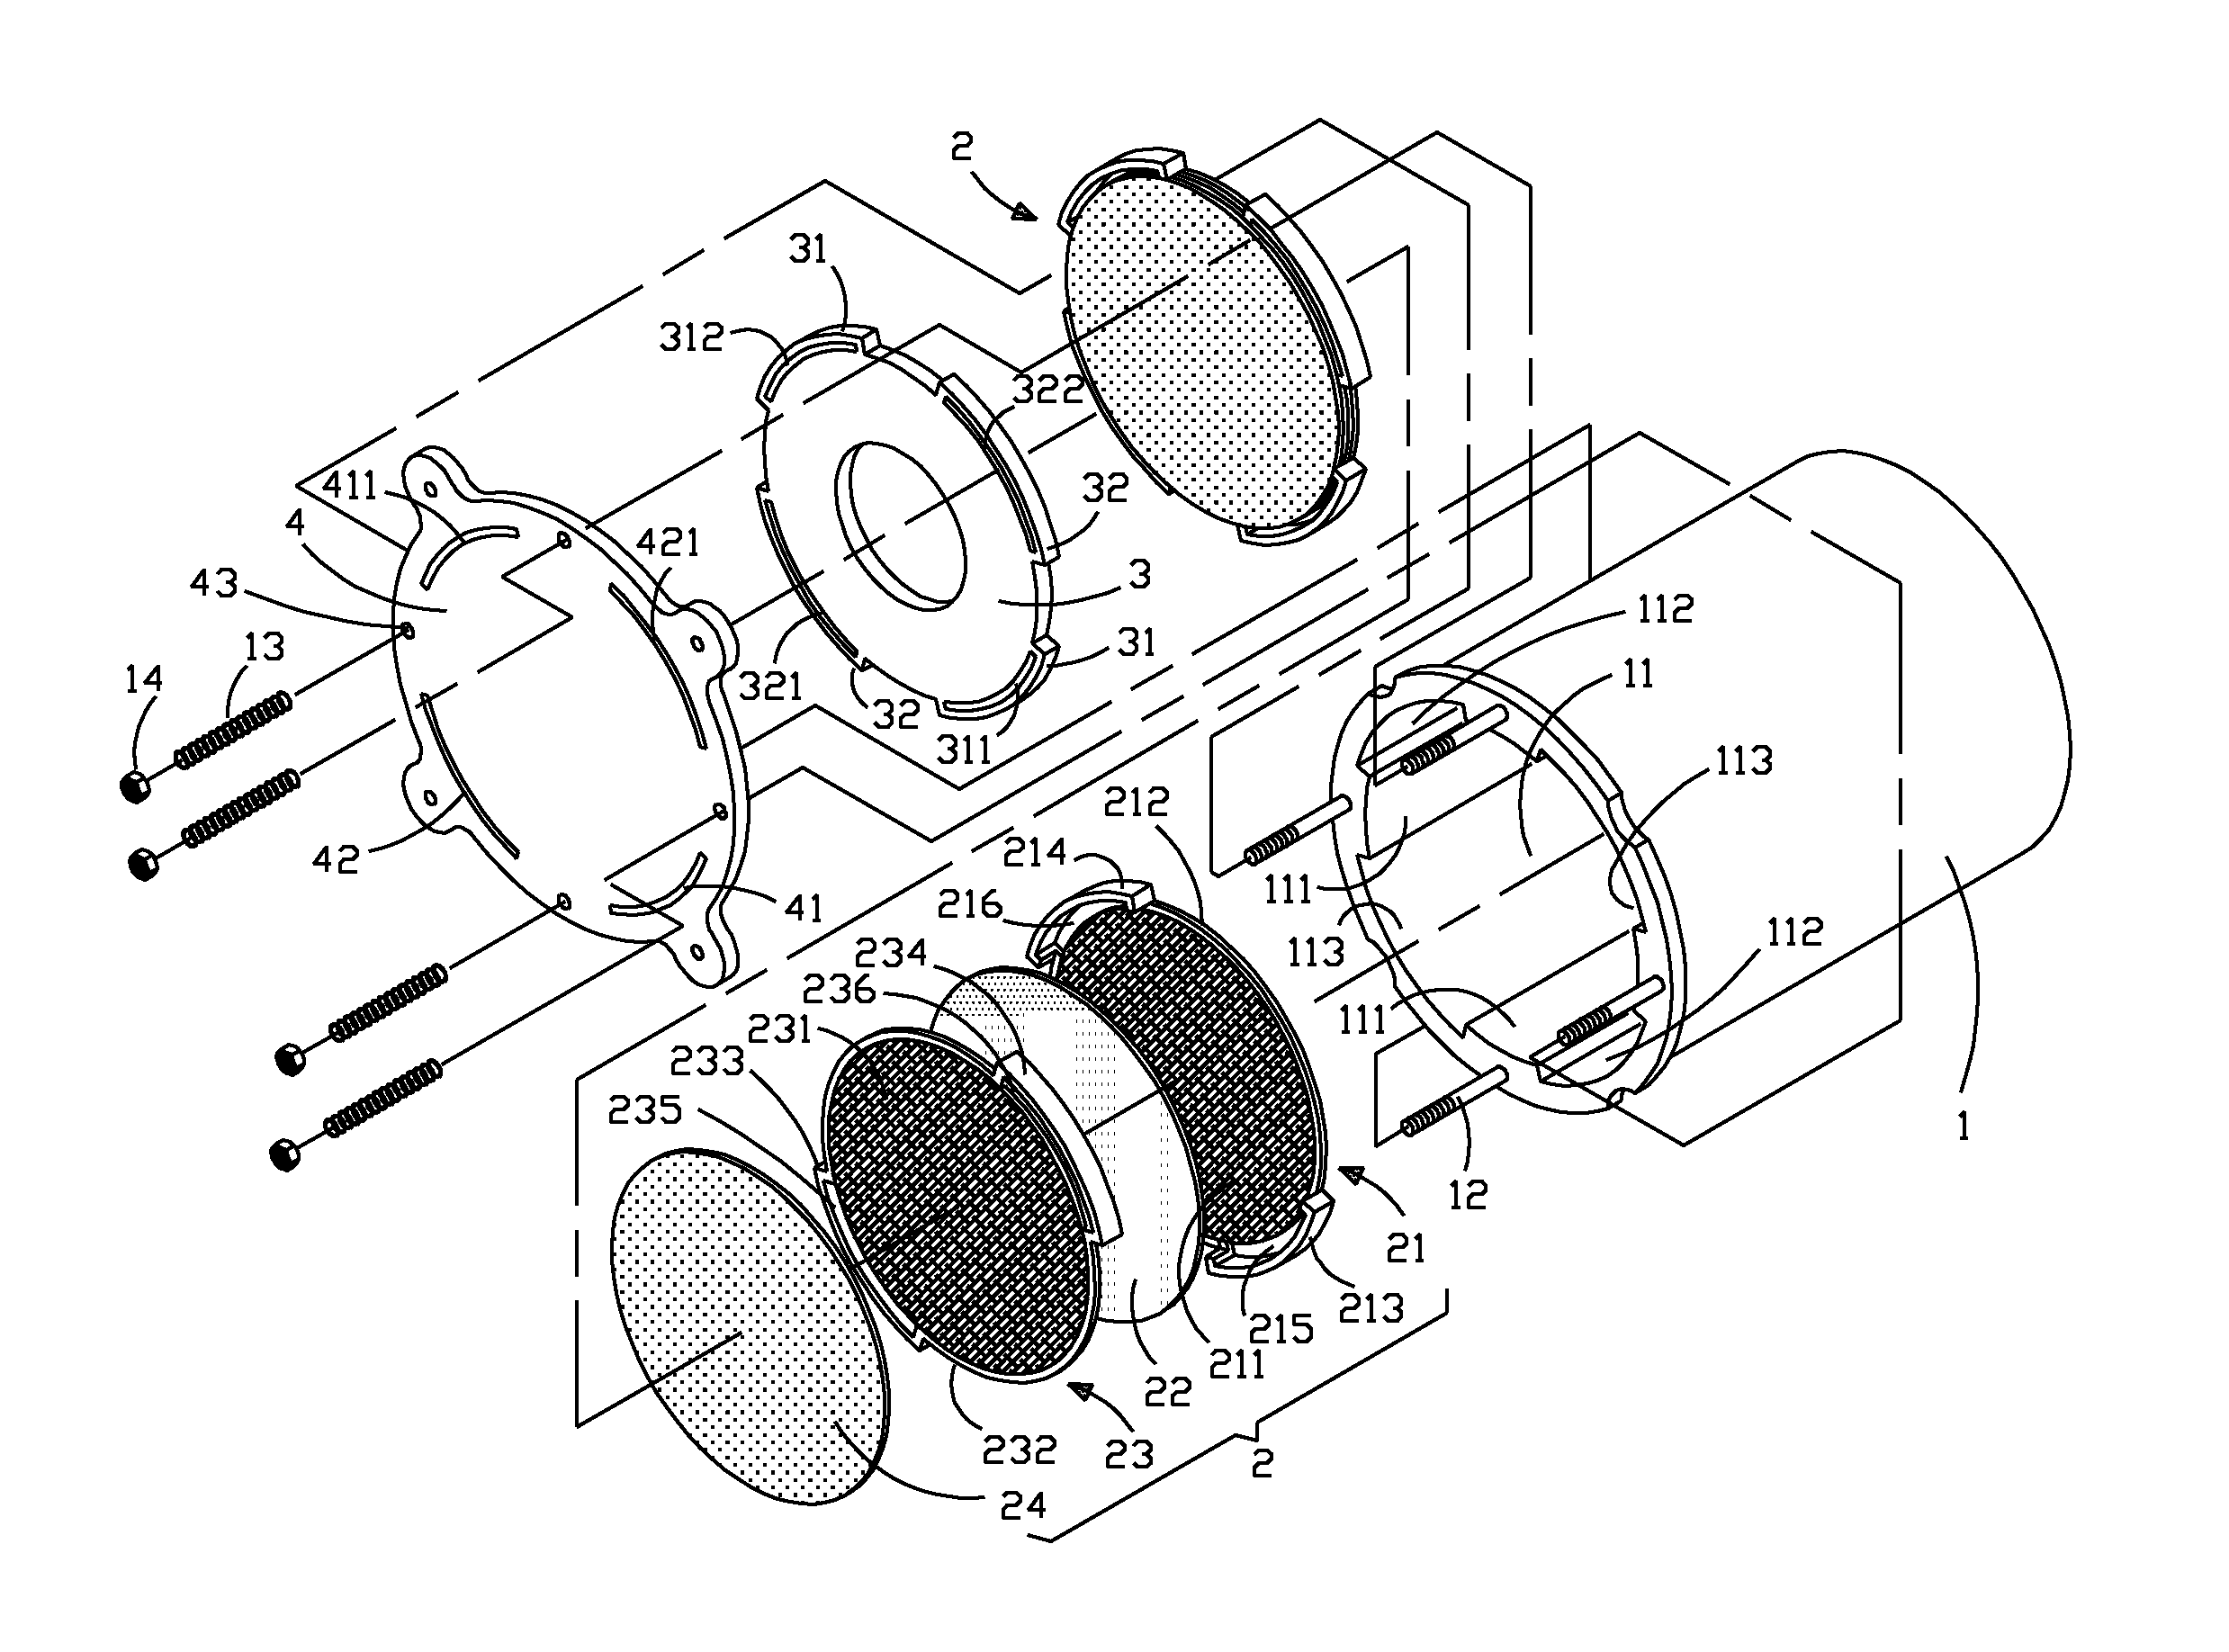 Fuel cell assembly structure